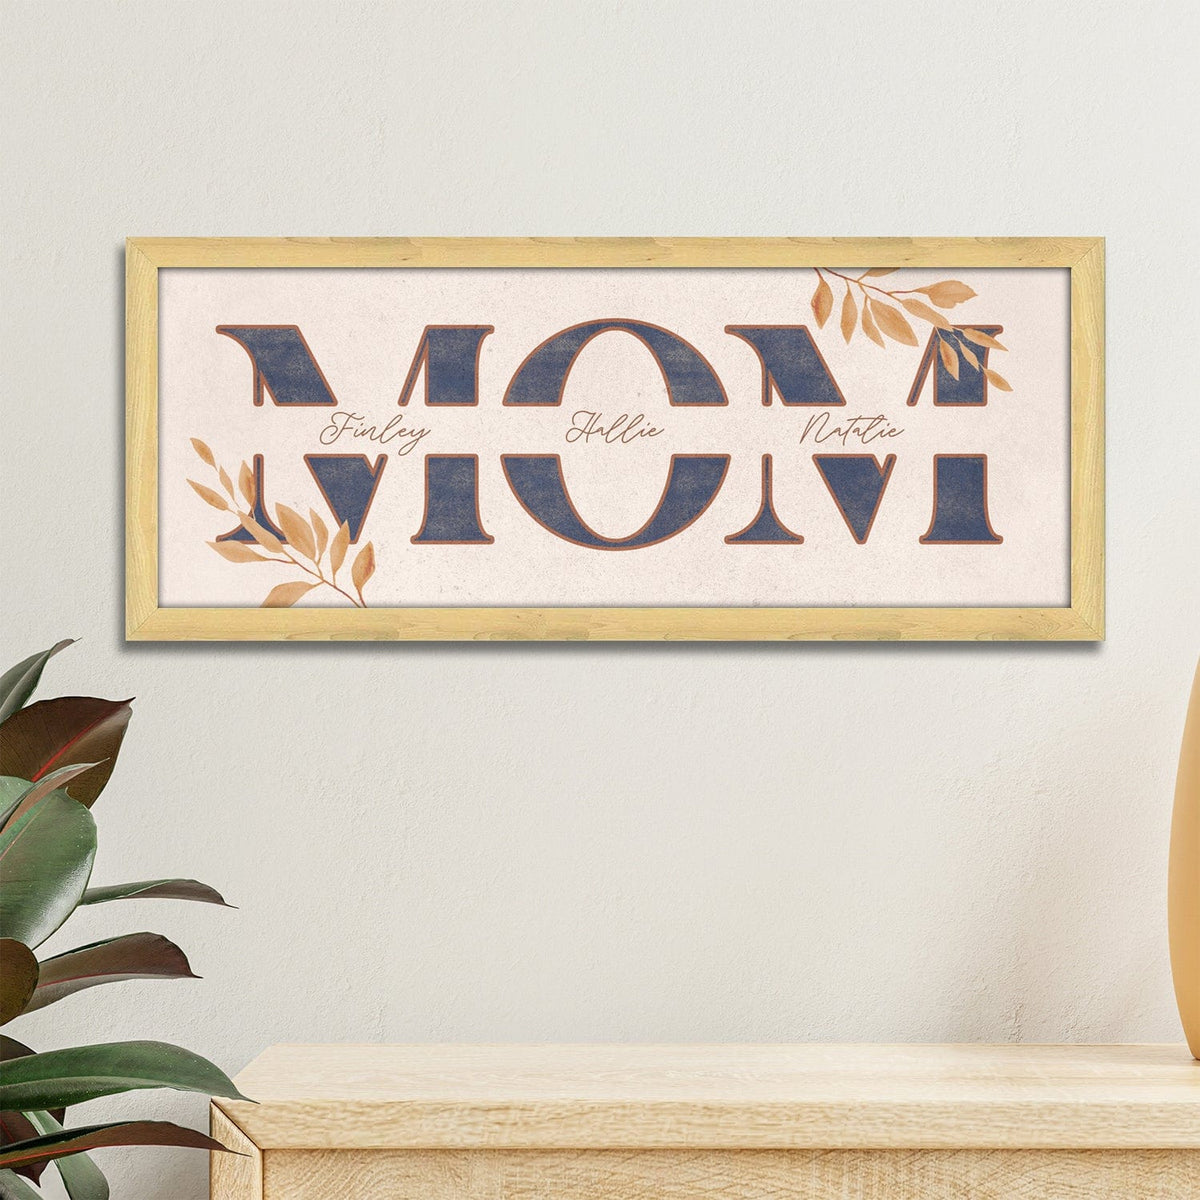 Personal Prints has the best Personalized gifts for Mom